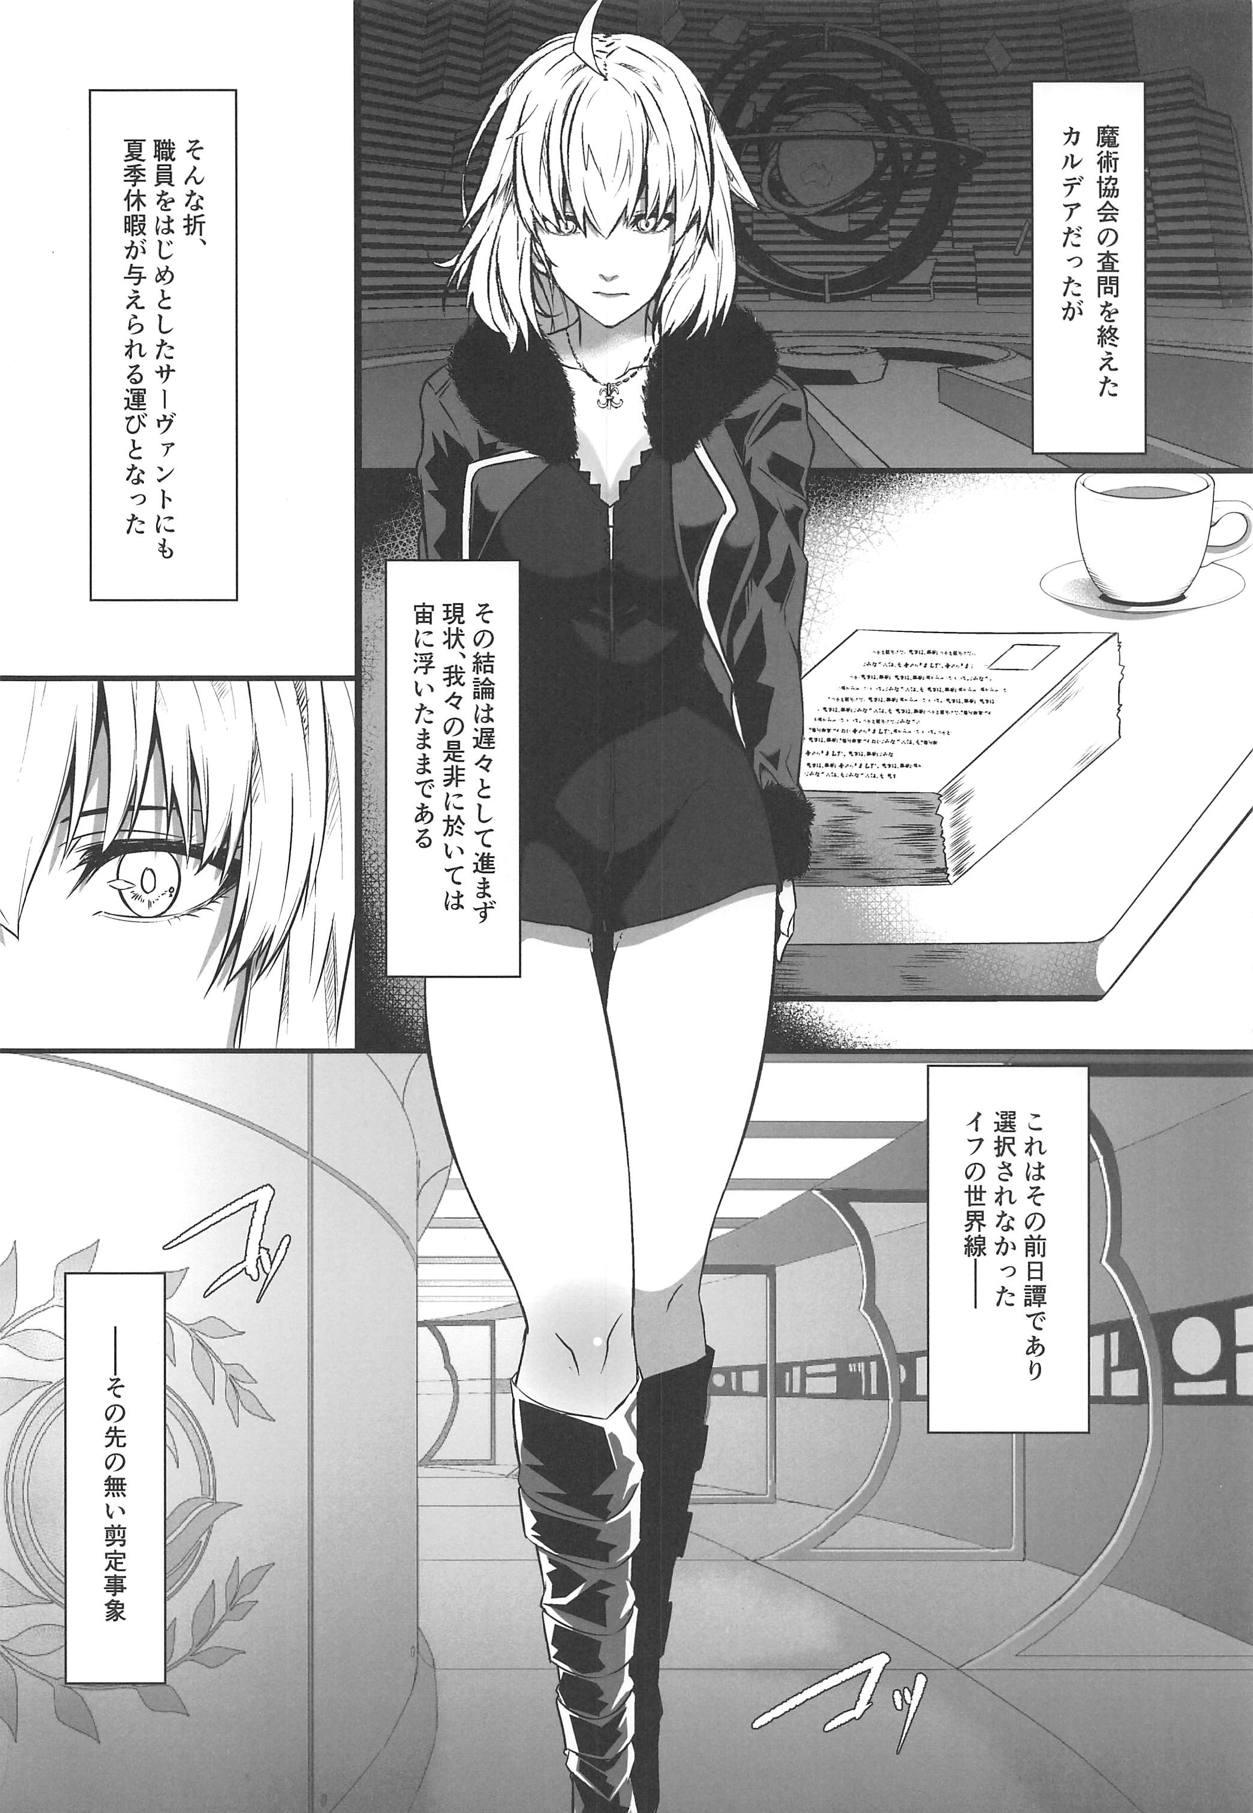 Internal Seijo no Neyagoto - Fate grand order Pussy - Page 3